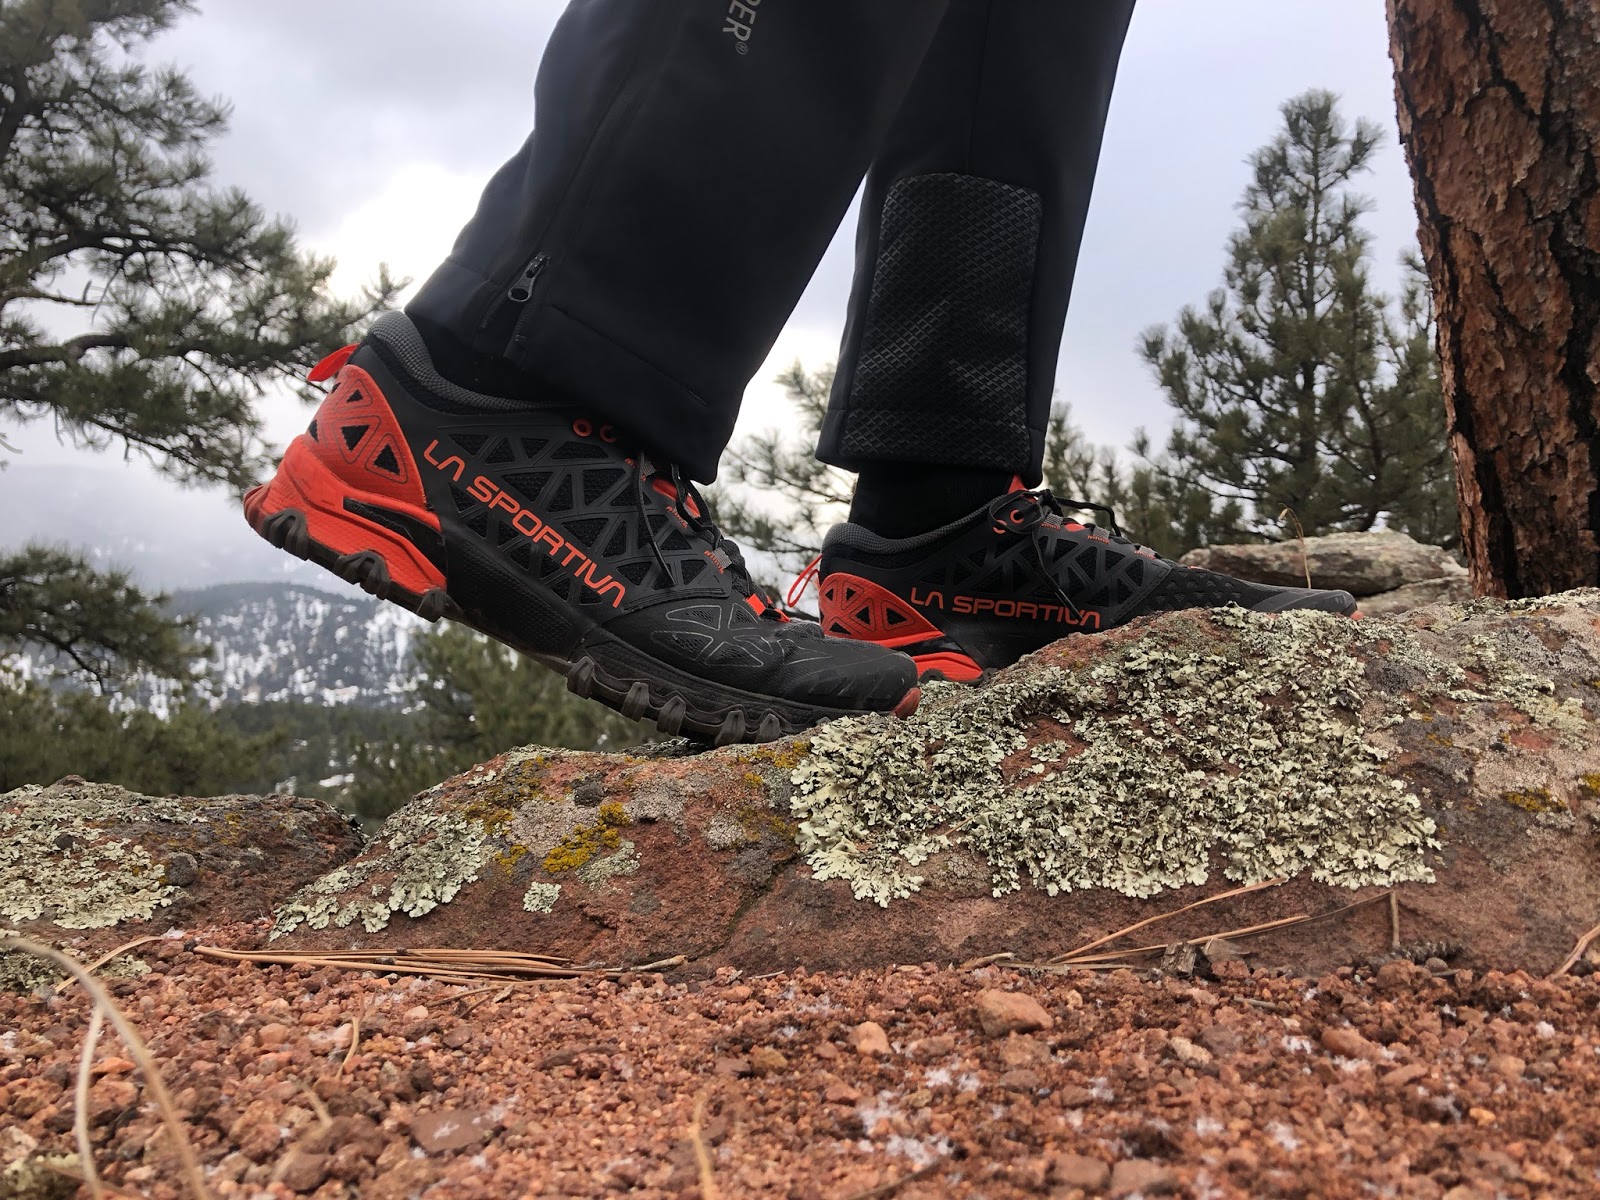 Road Trail La Sportiva Bushido Review- Totally Confidence Inspiring. Now with More Cushion and